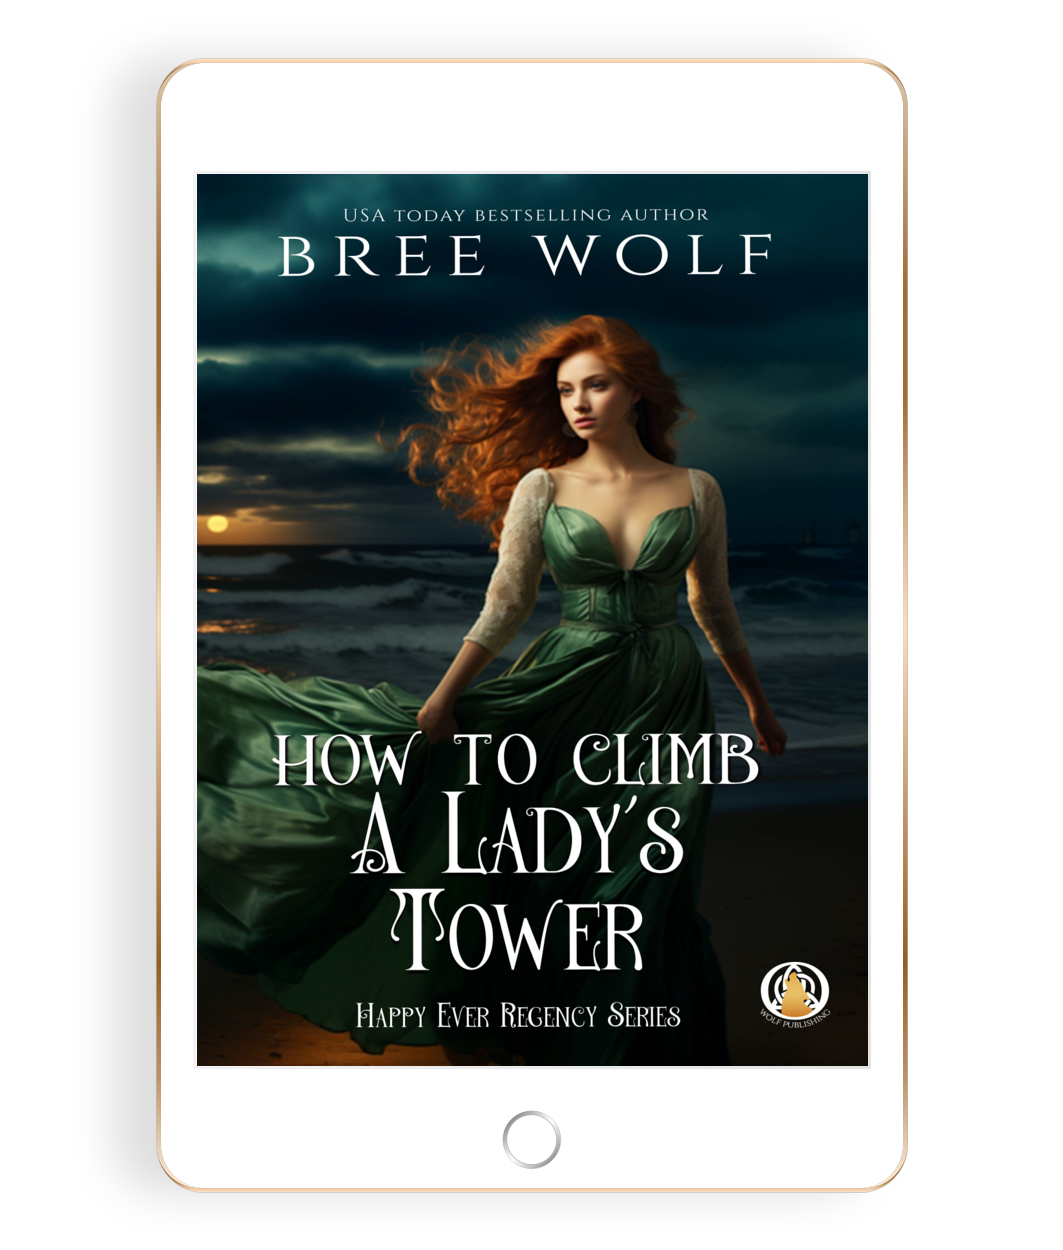 How to Climb a Lady's Tower (Book 4)